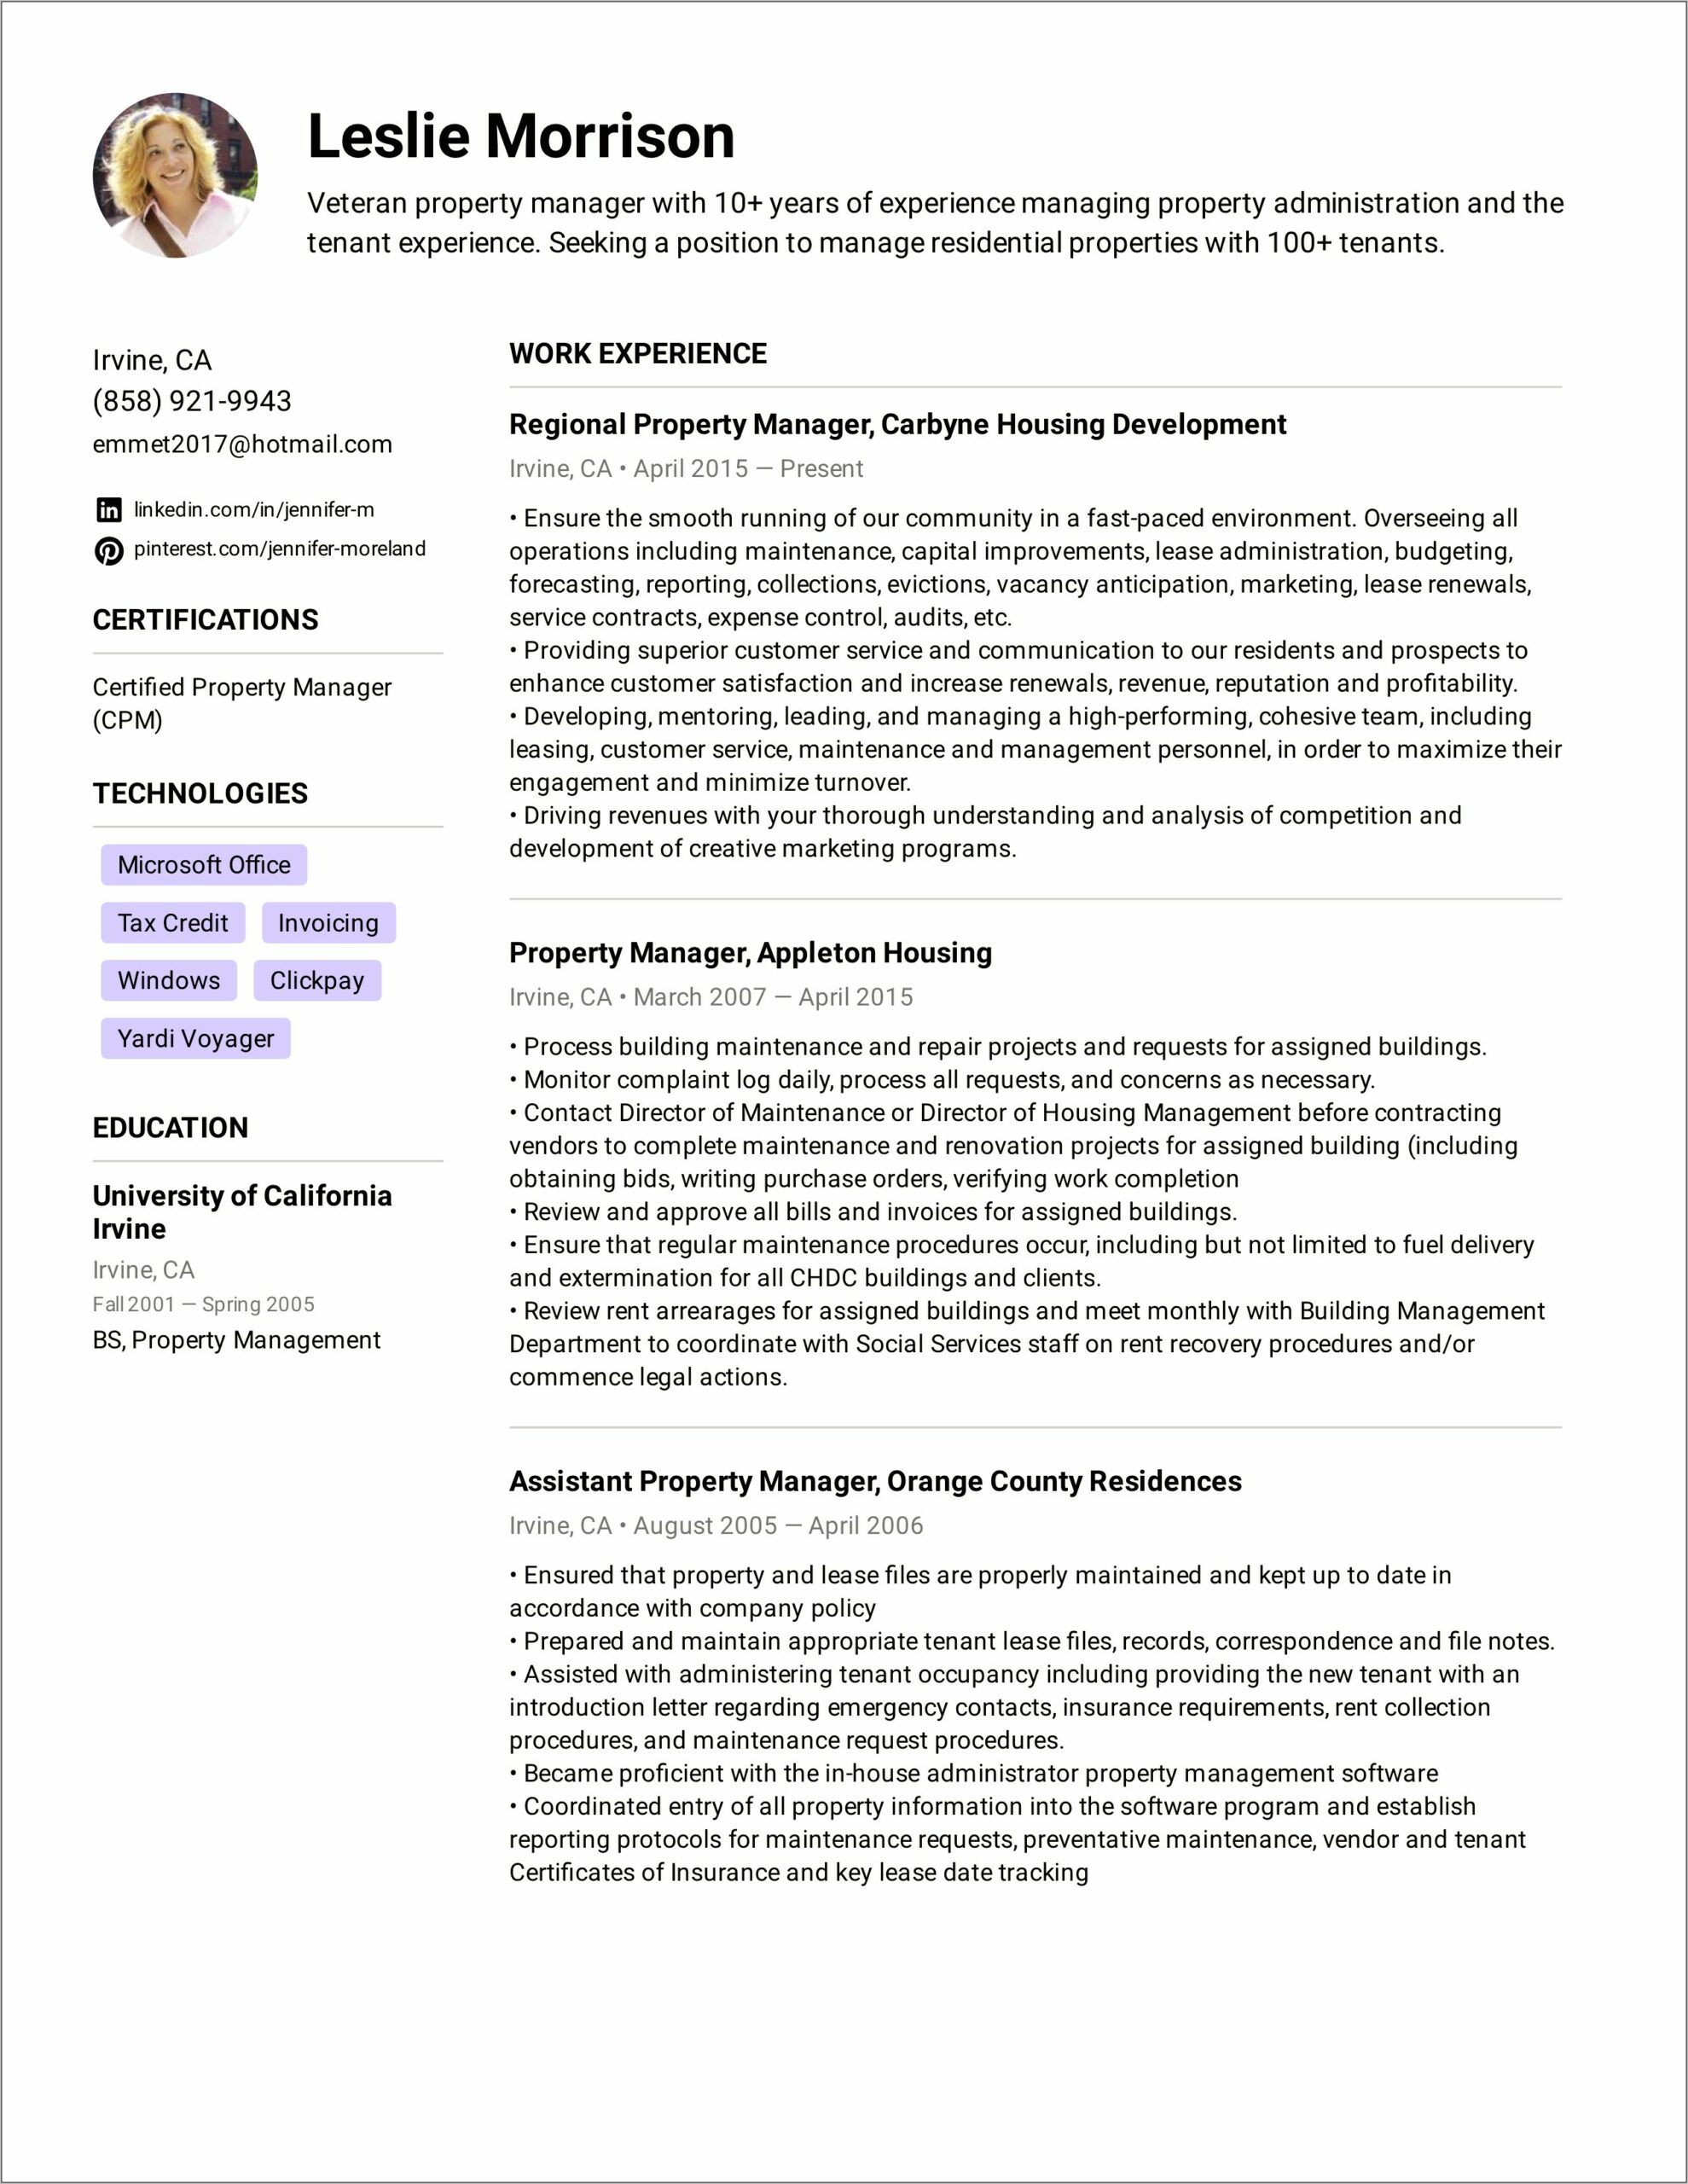 Sample Resume For An Assistant Property Manager